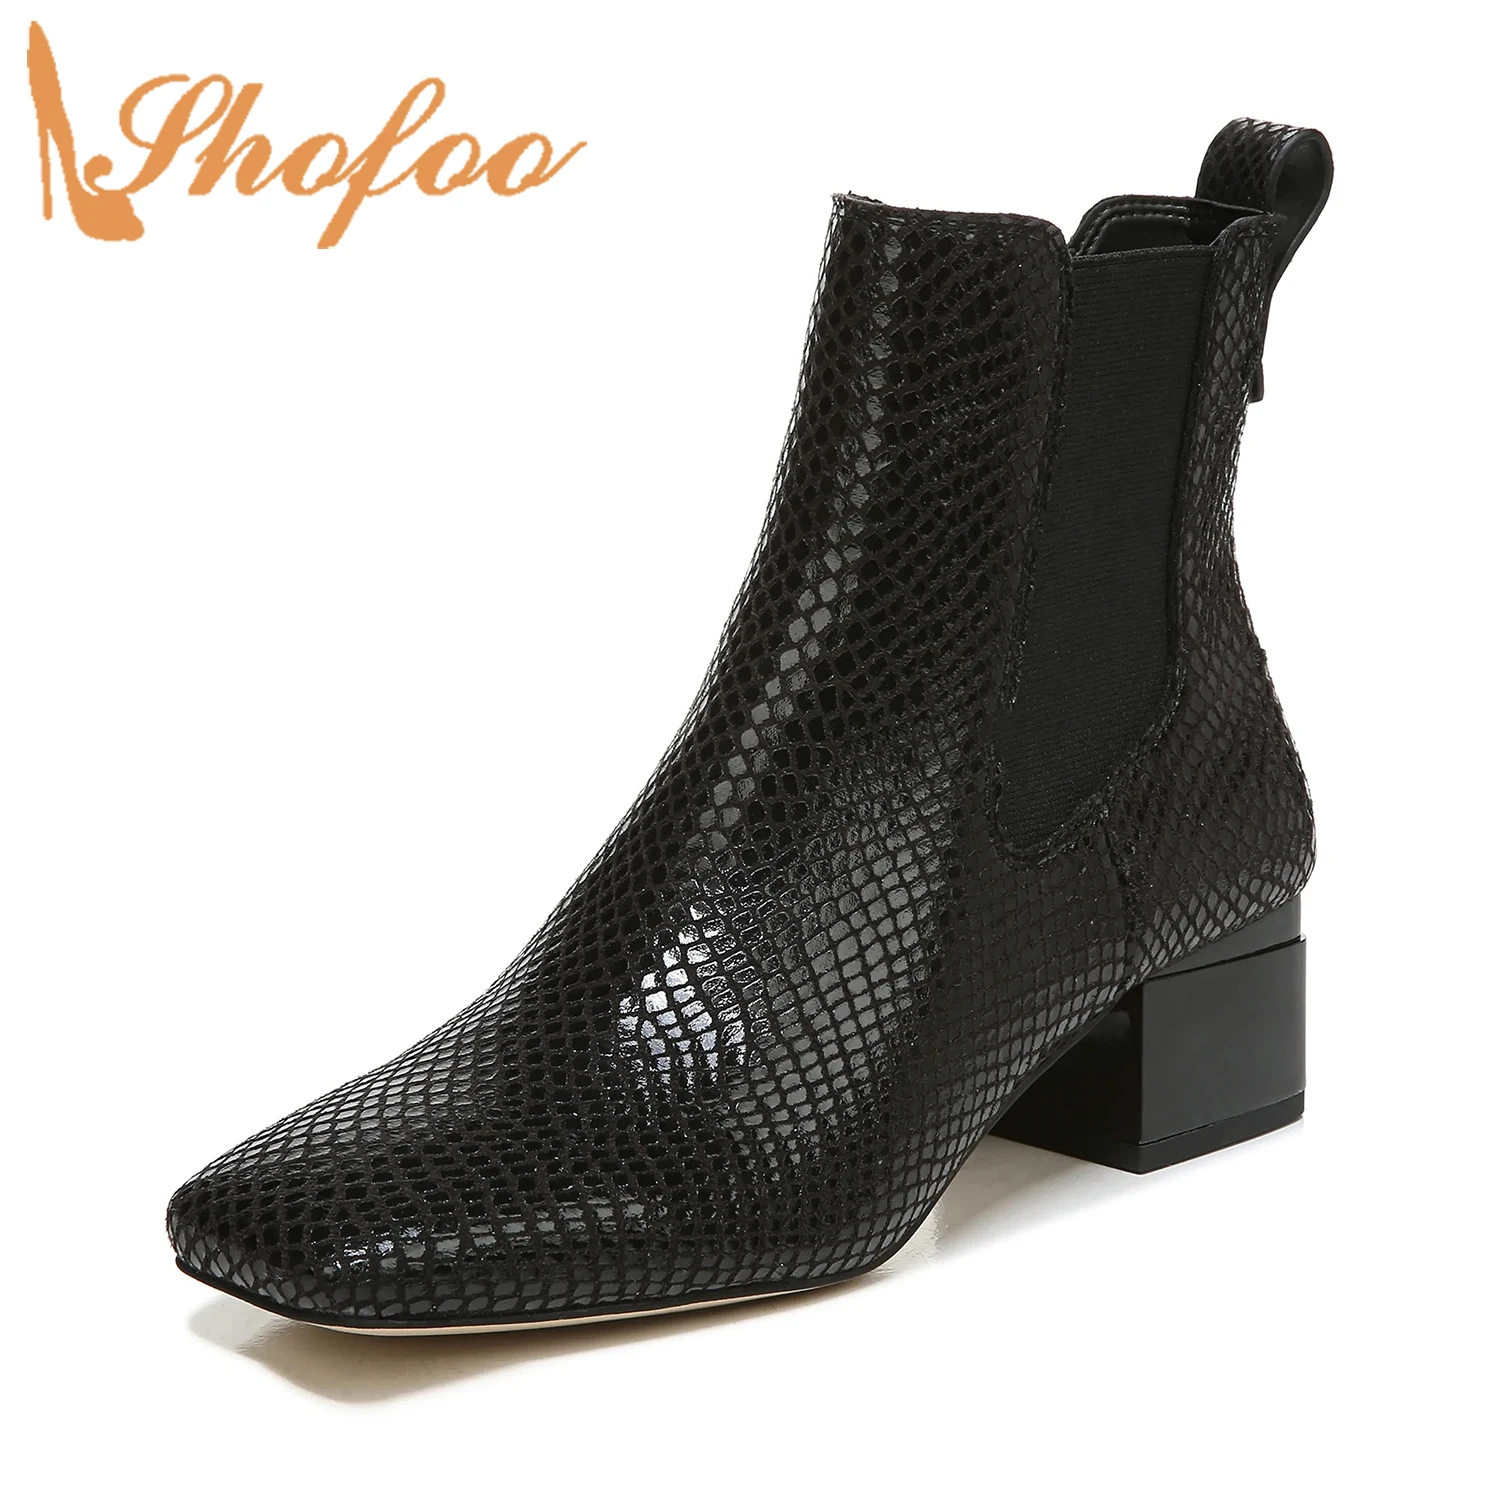 

Black Snackskin High Block Heels Women Ankle Boots Square Toe Chelsea Booties Ladies Winter Mature Shoes Large Size 41 42 Shofoo